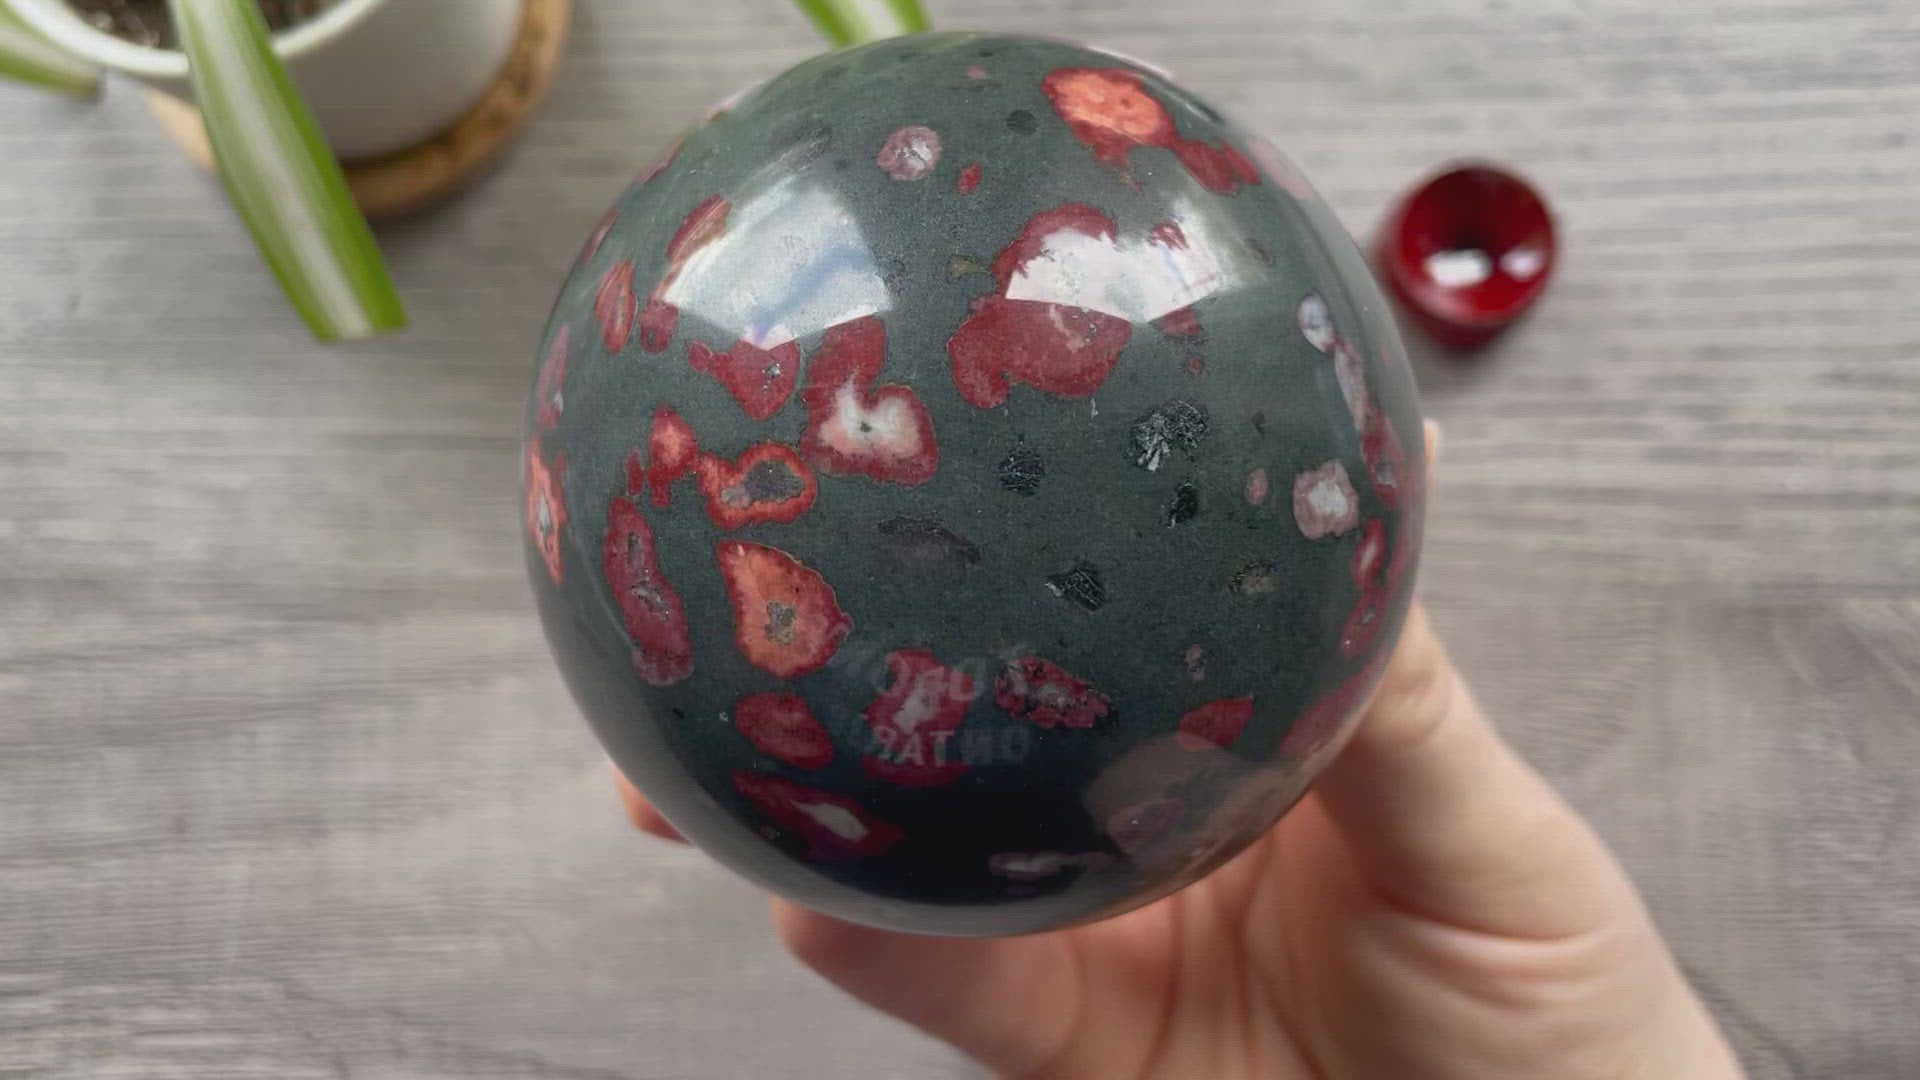 Pictured is a sphere carved out of plumite / poppy jasper.